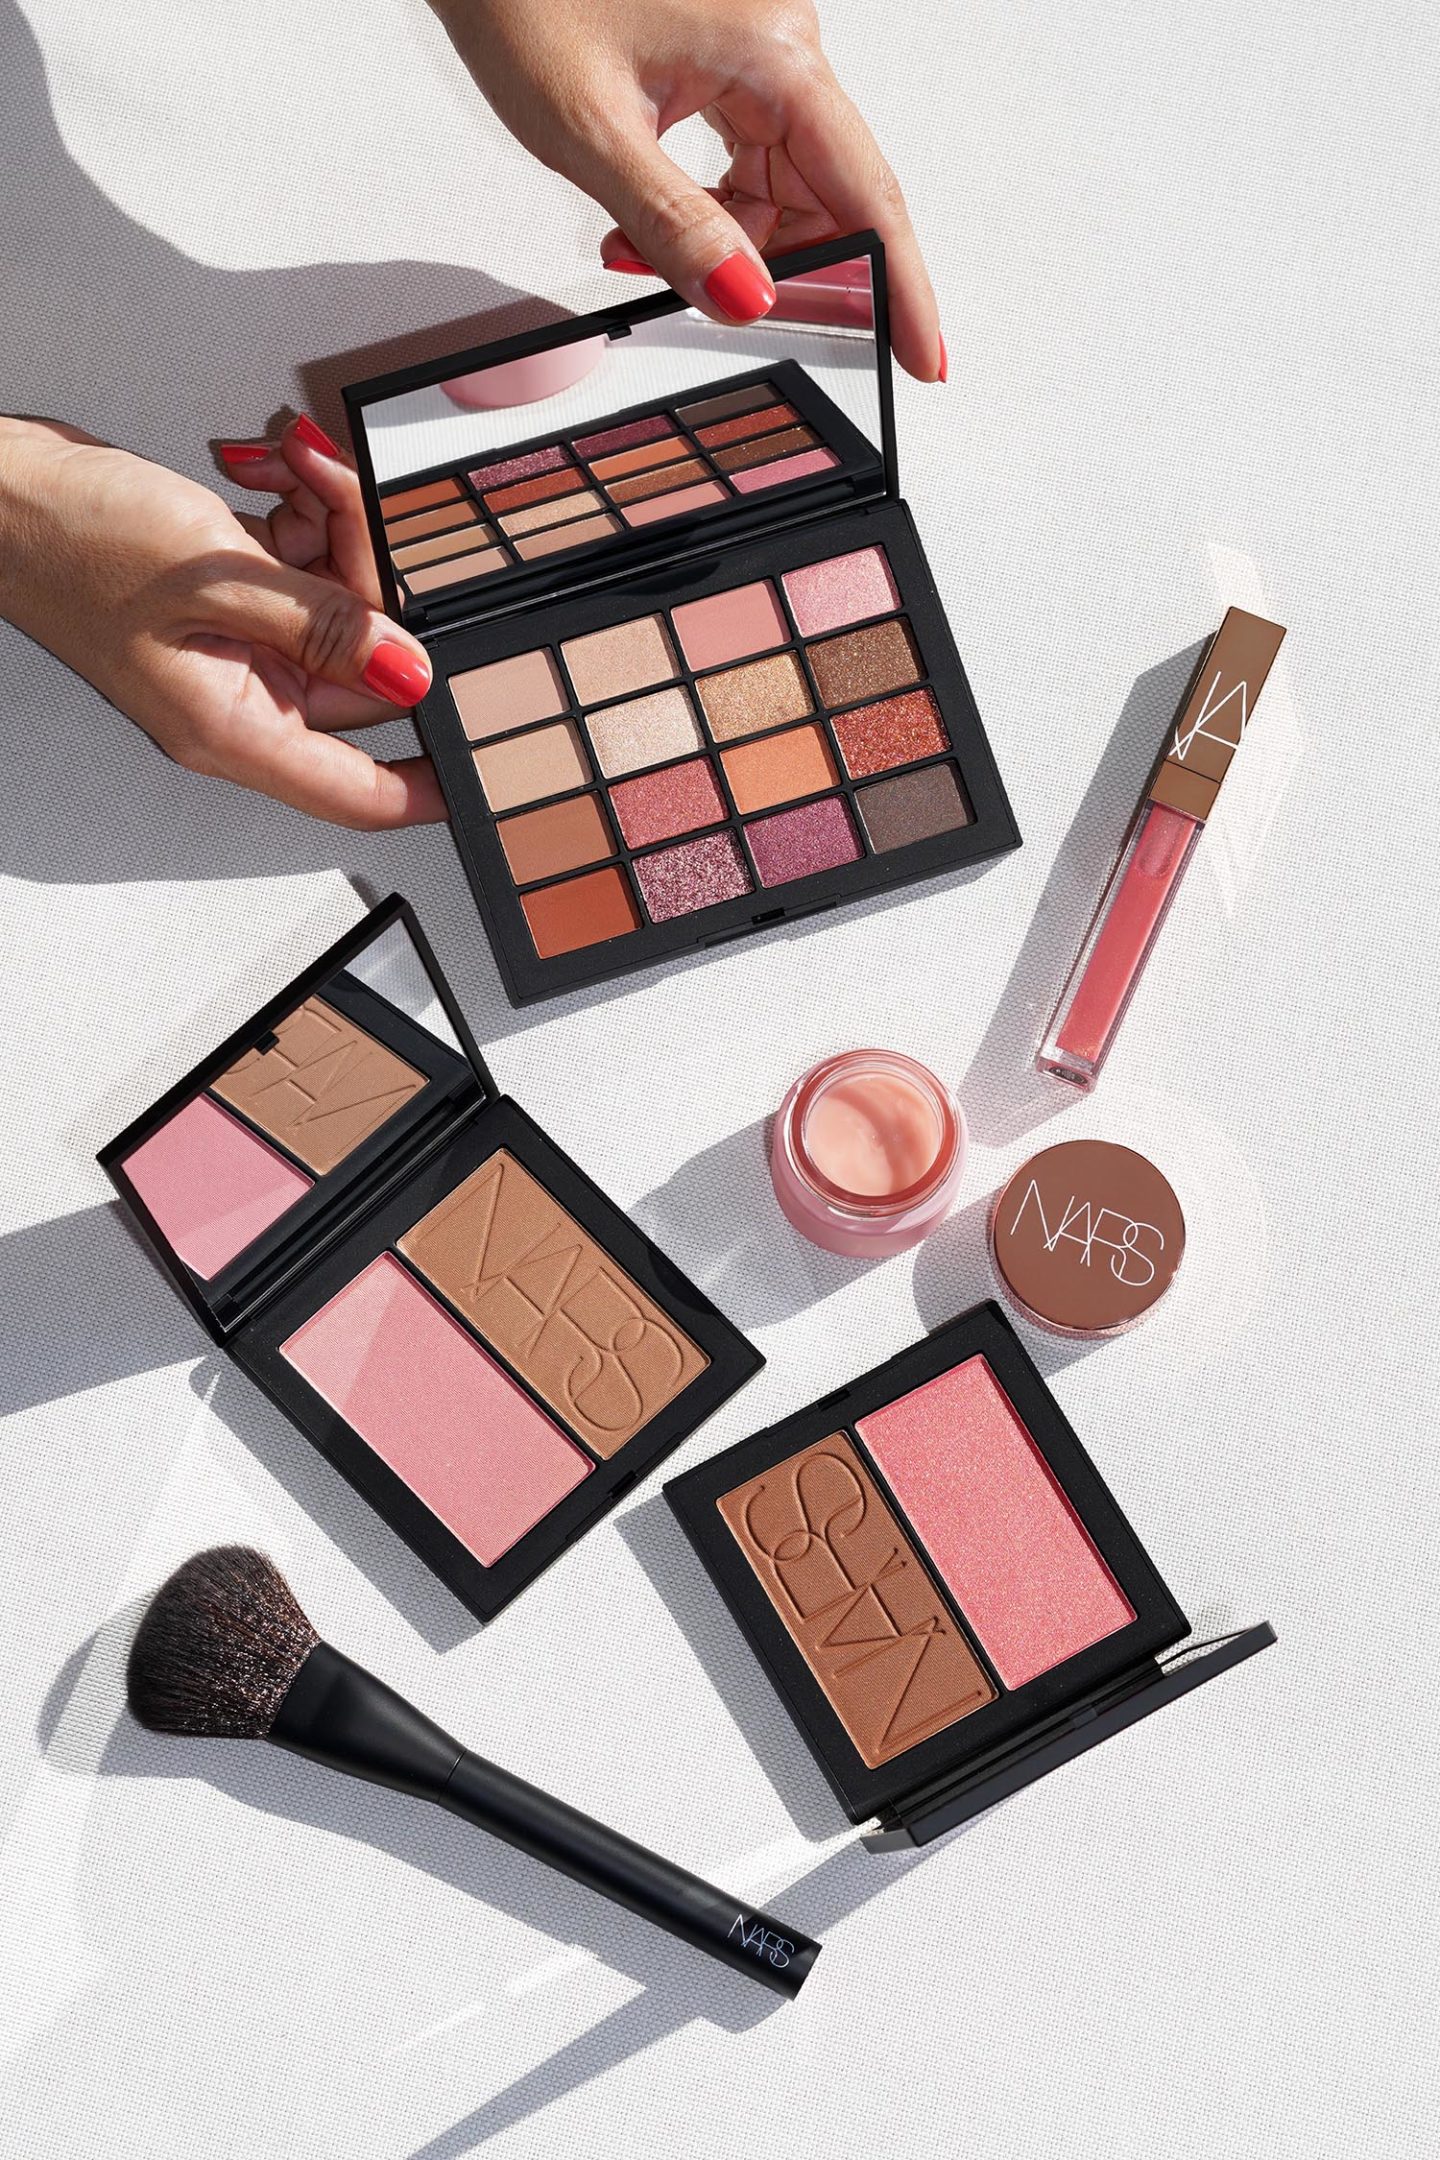 NARS Summer Unrated 2022 Review